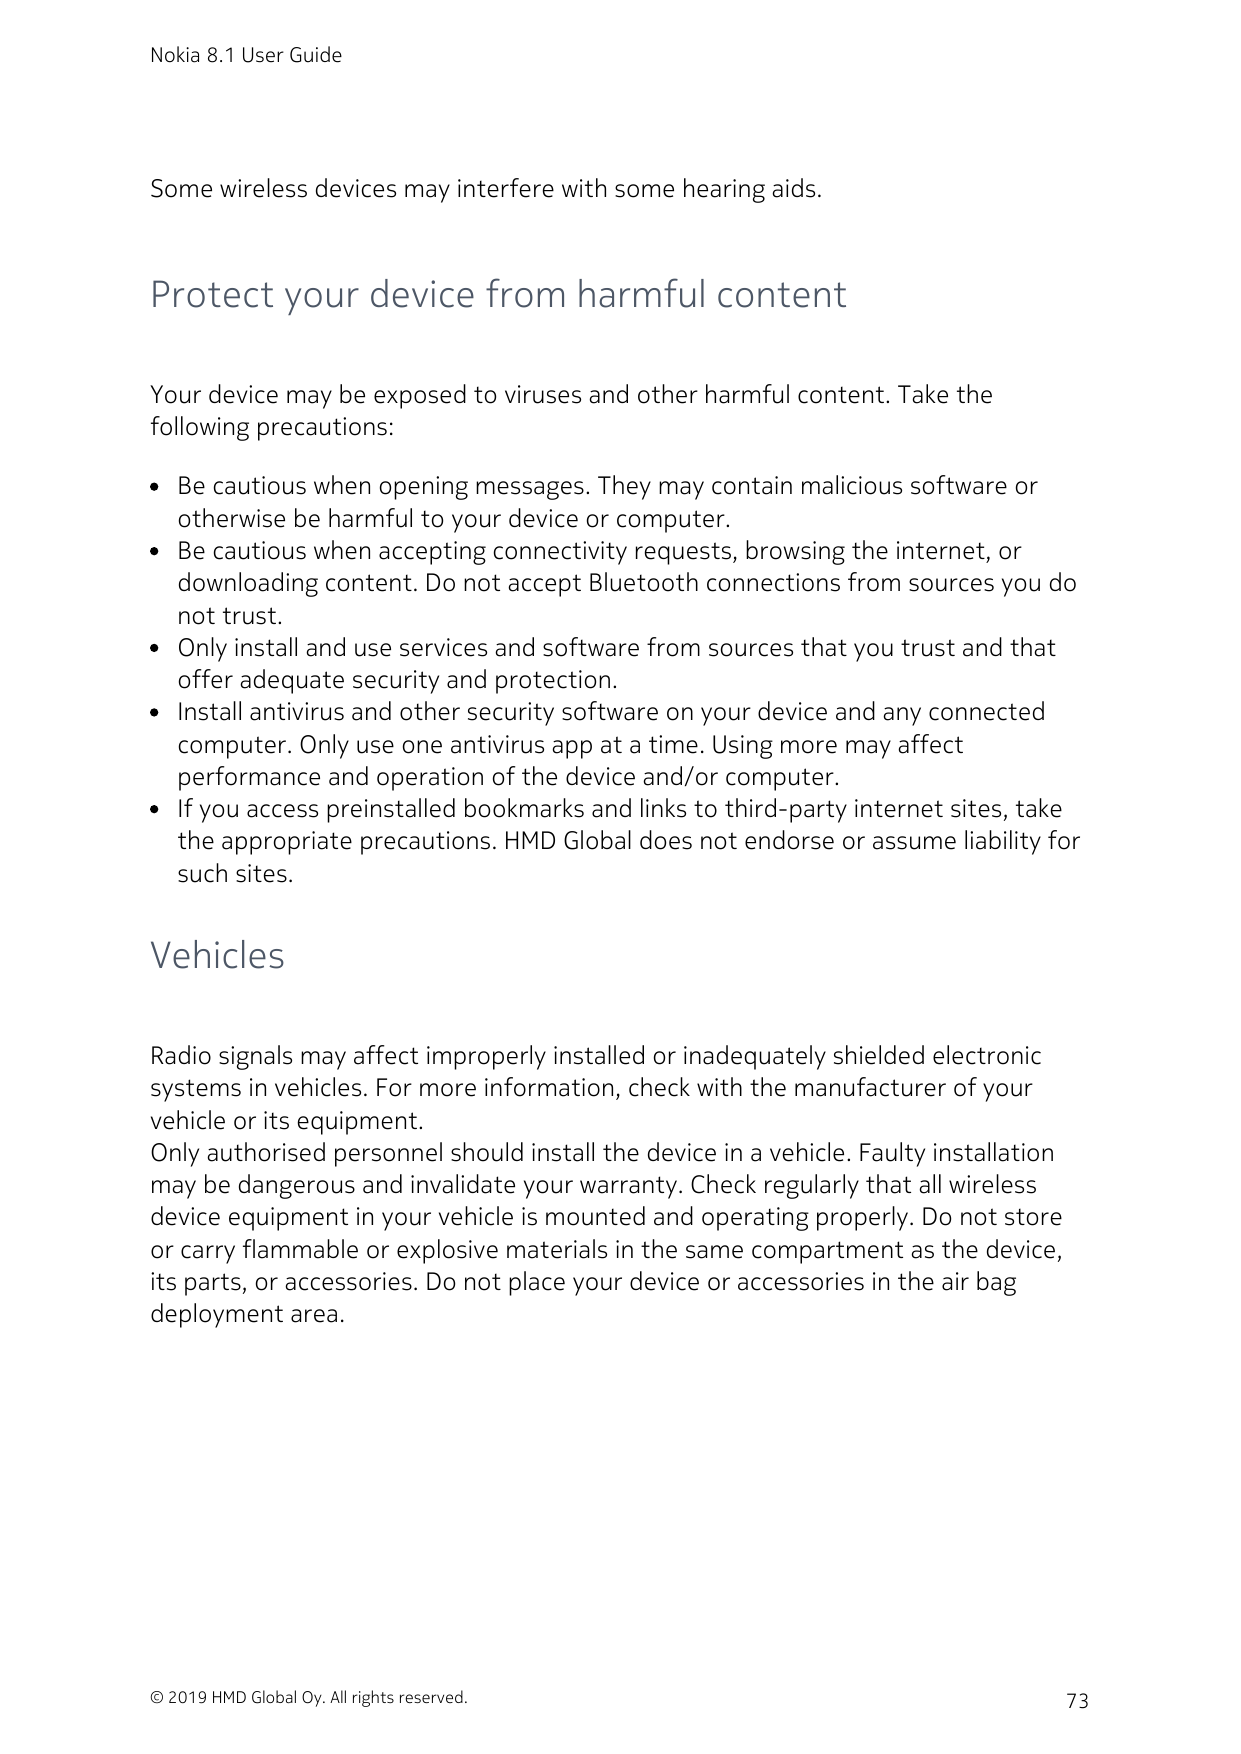 Nokia 8.1 User GuideSome wireless devices may interfere with some hearing aids.Protect your device from harmful contentYour devi